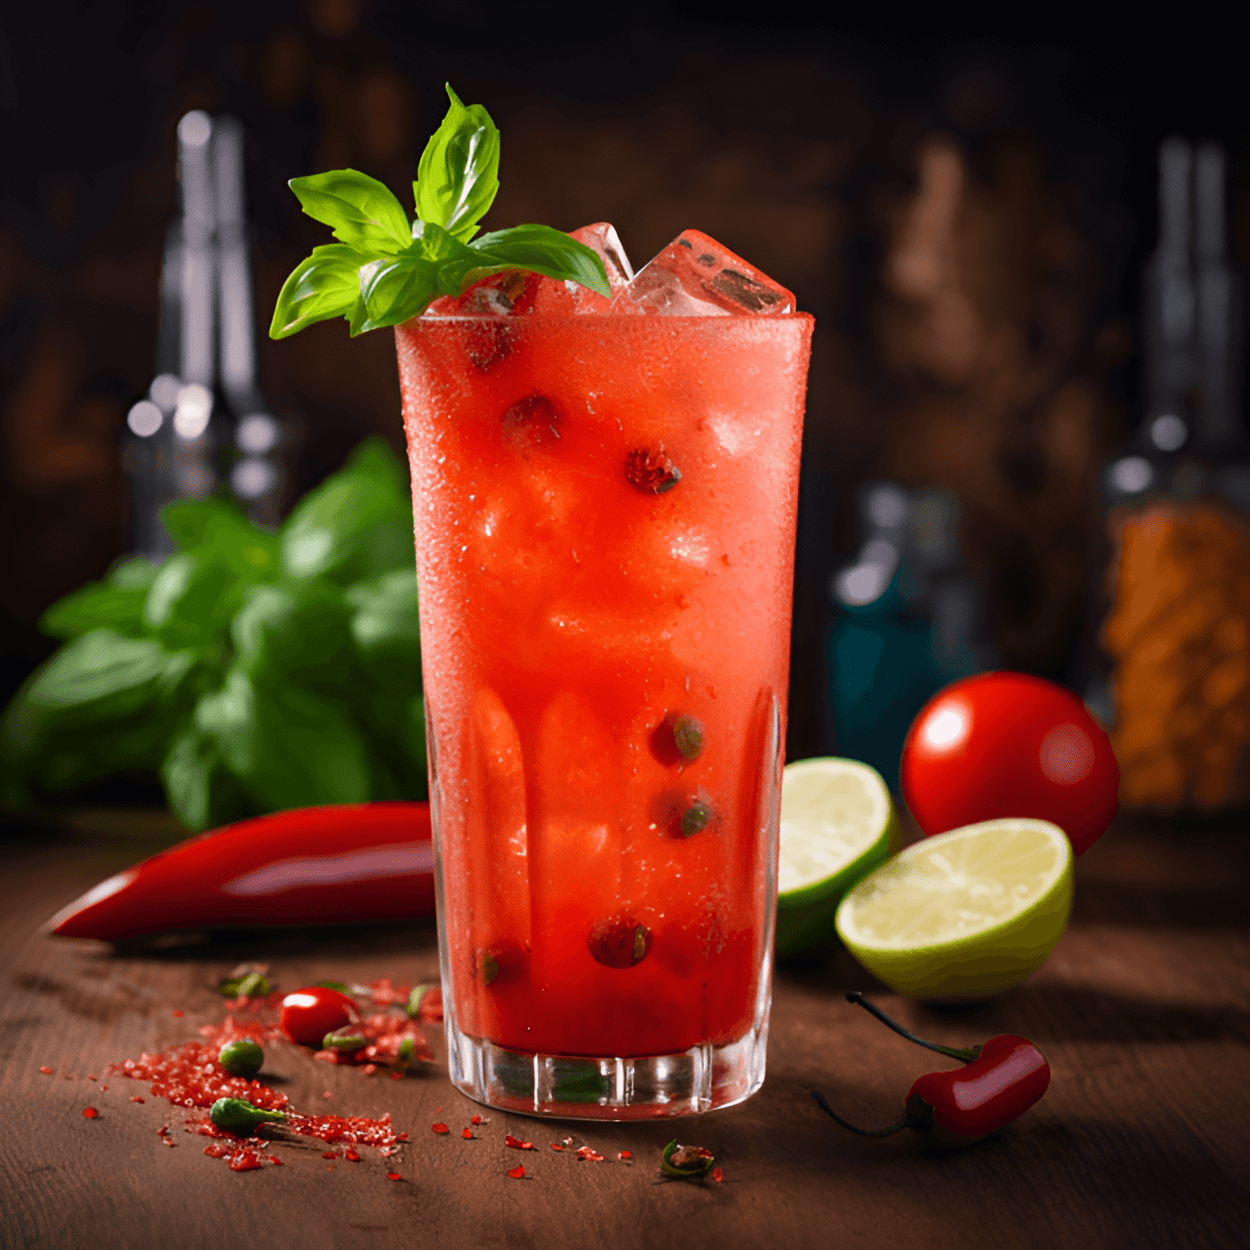 Want to Spice Up Your Bloody Mary? Try This Recipe! - The Spicy Bloody Mary is a savory cocktail with a robust, tangy flavor. The tomato juice gives it a hearty base, while the vodka adds a clean, crisp bite. The addition of hot sauce, Worcestershire sauce, and horseradish gives it a spicy kick that lingers on the palate.